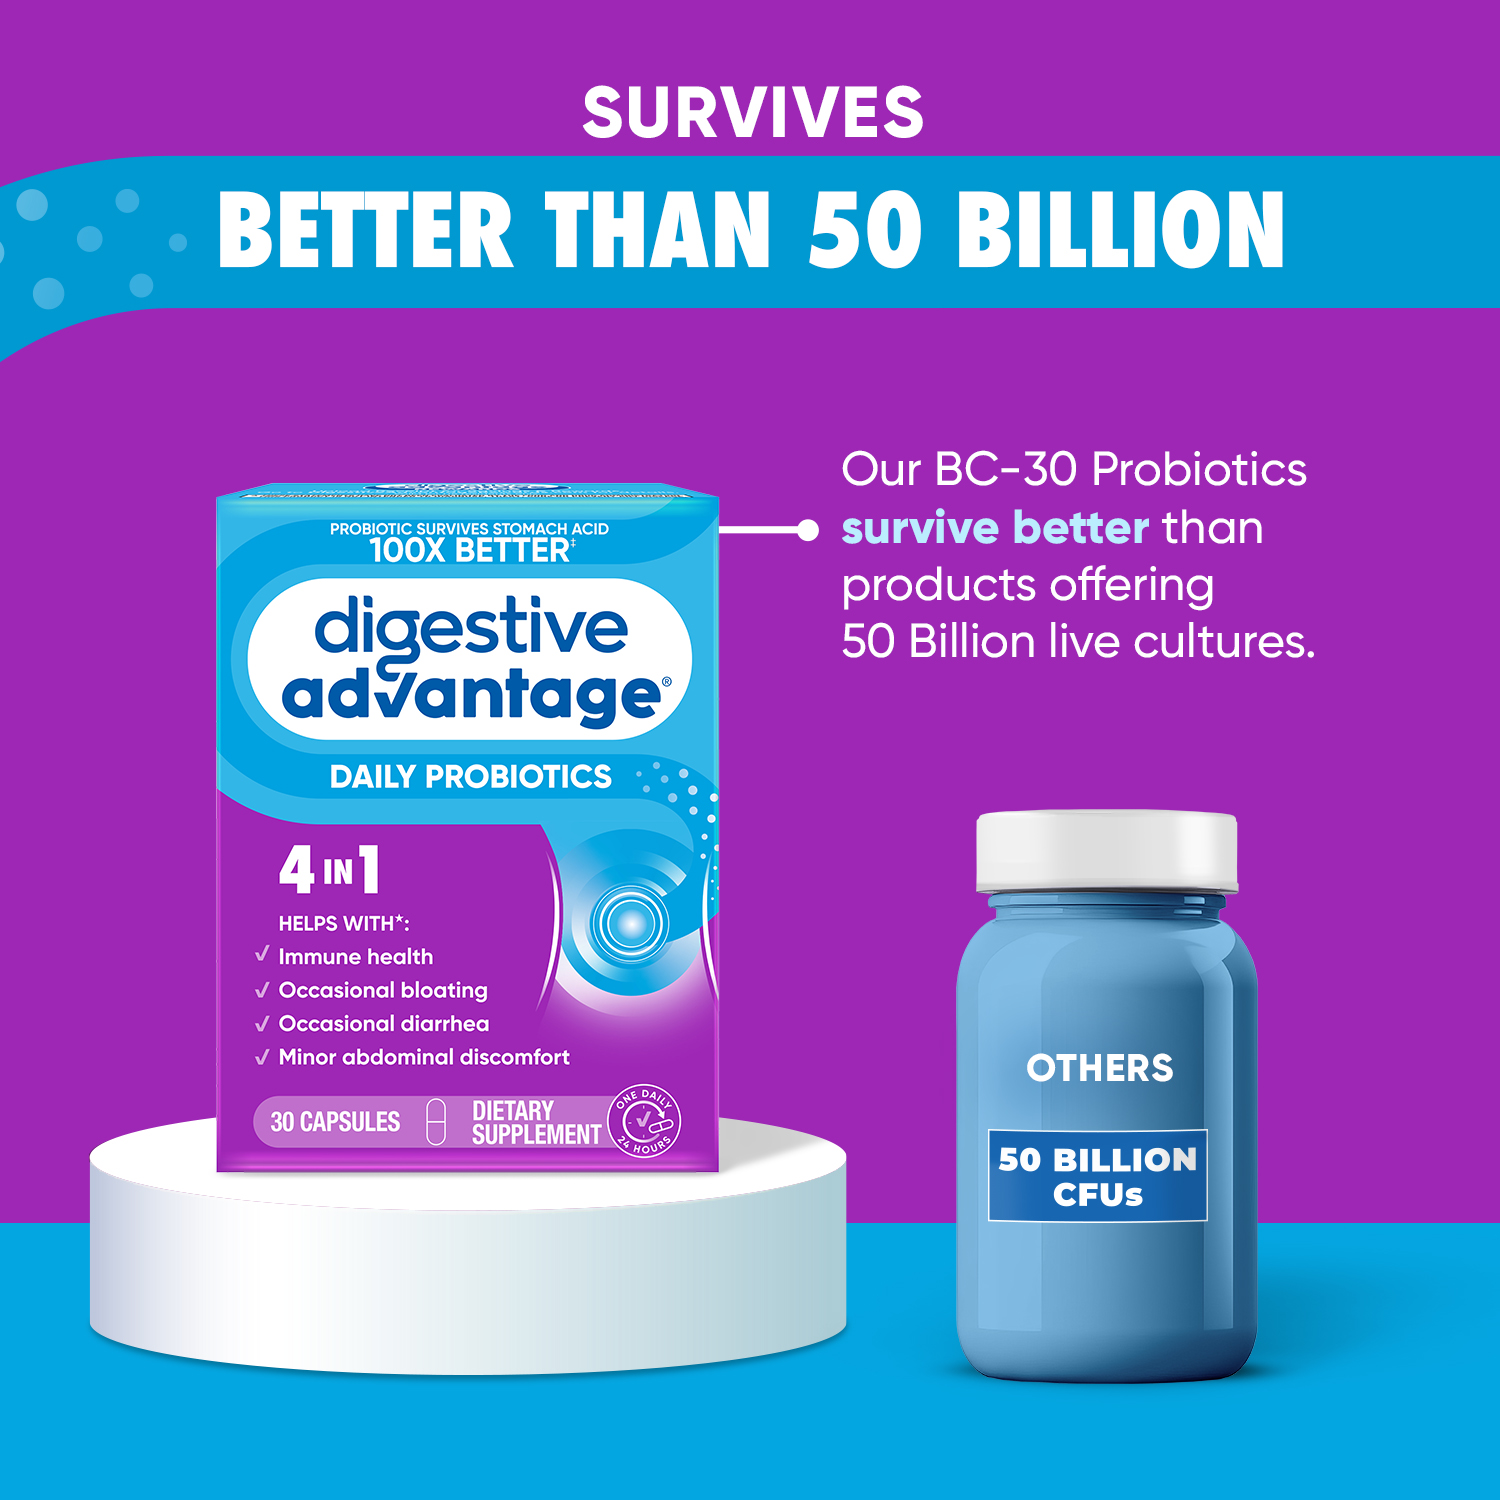 Digestive Advantage Daily Probiotic, Survives Better than 50 Billion - 30 Capsules - image 3 of 8